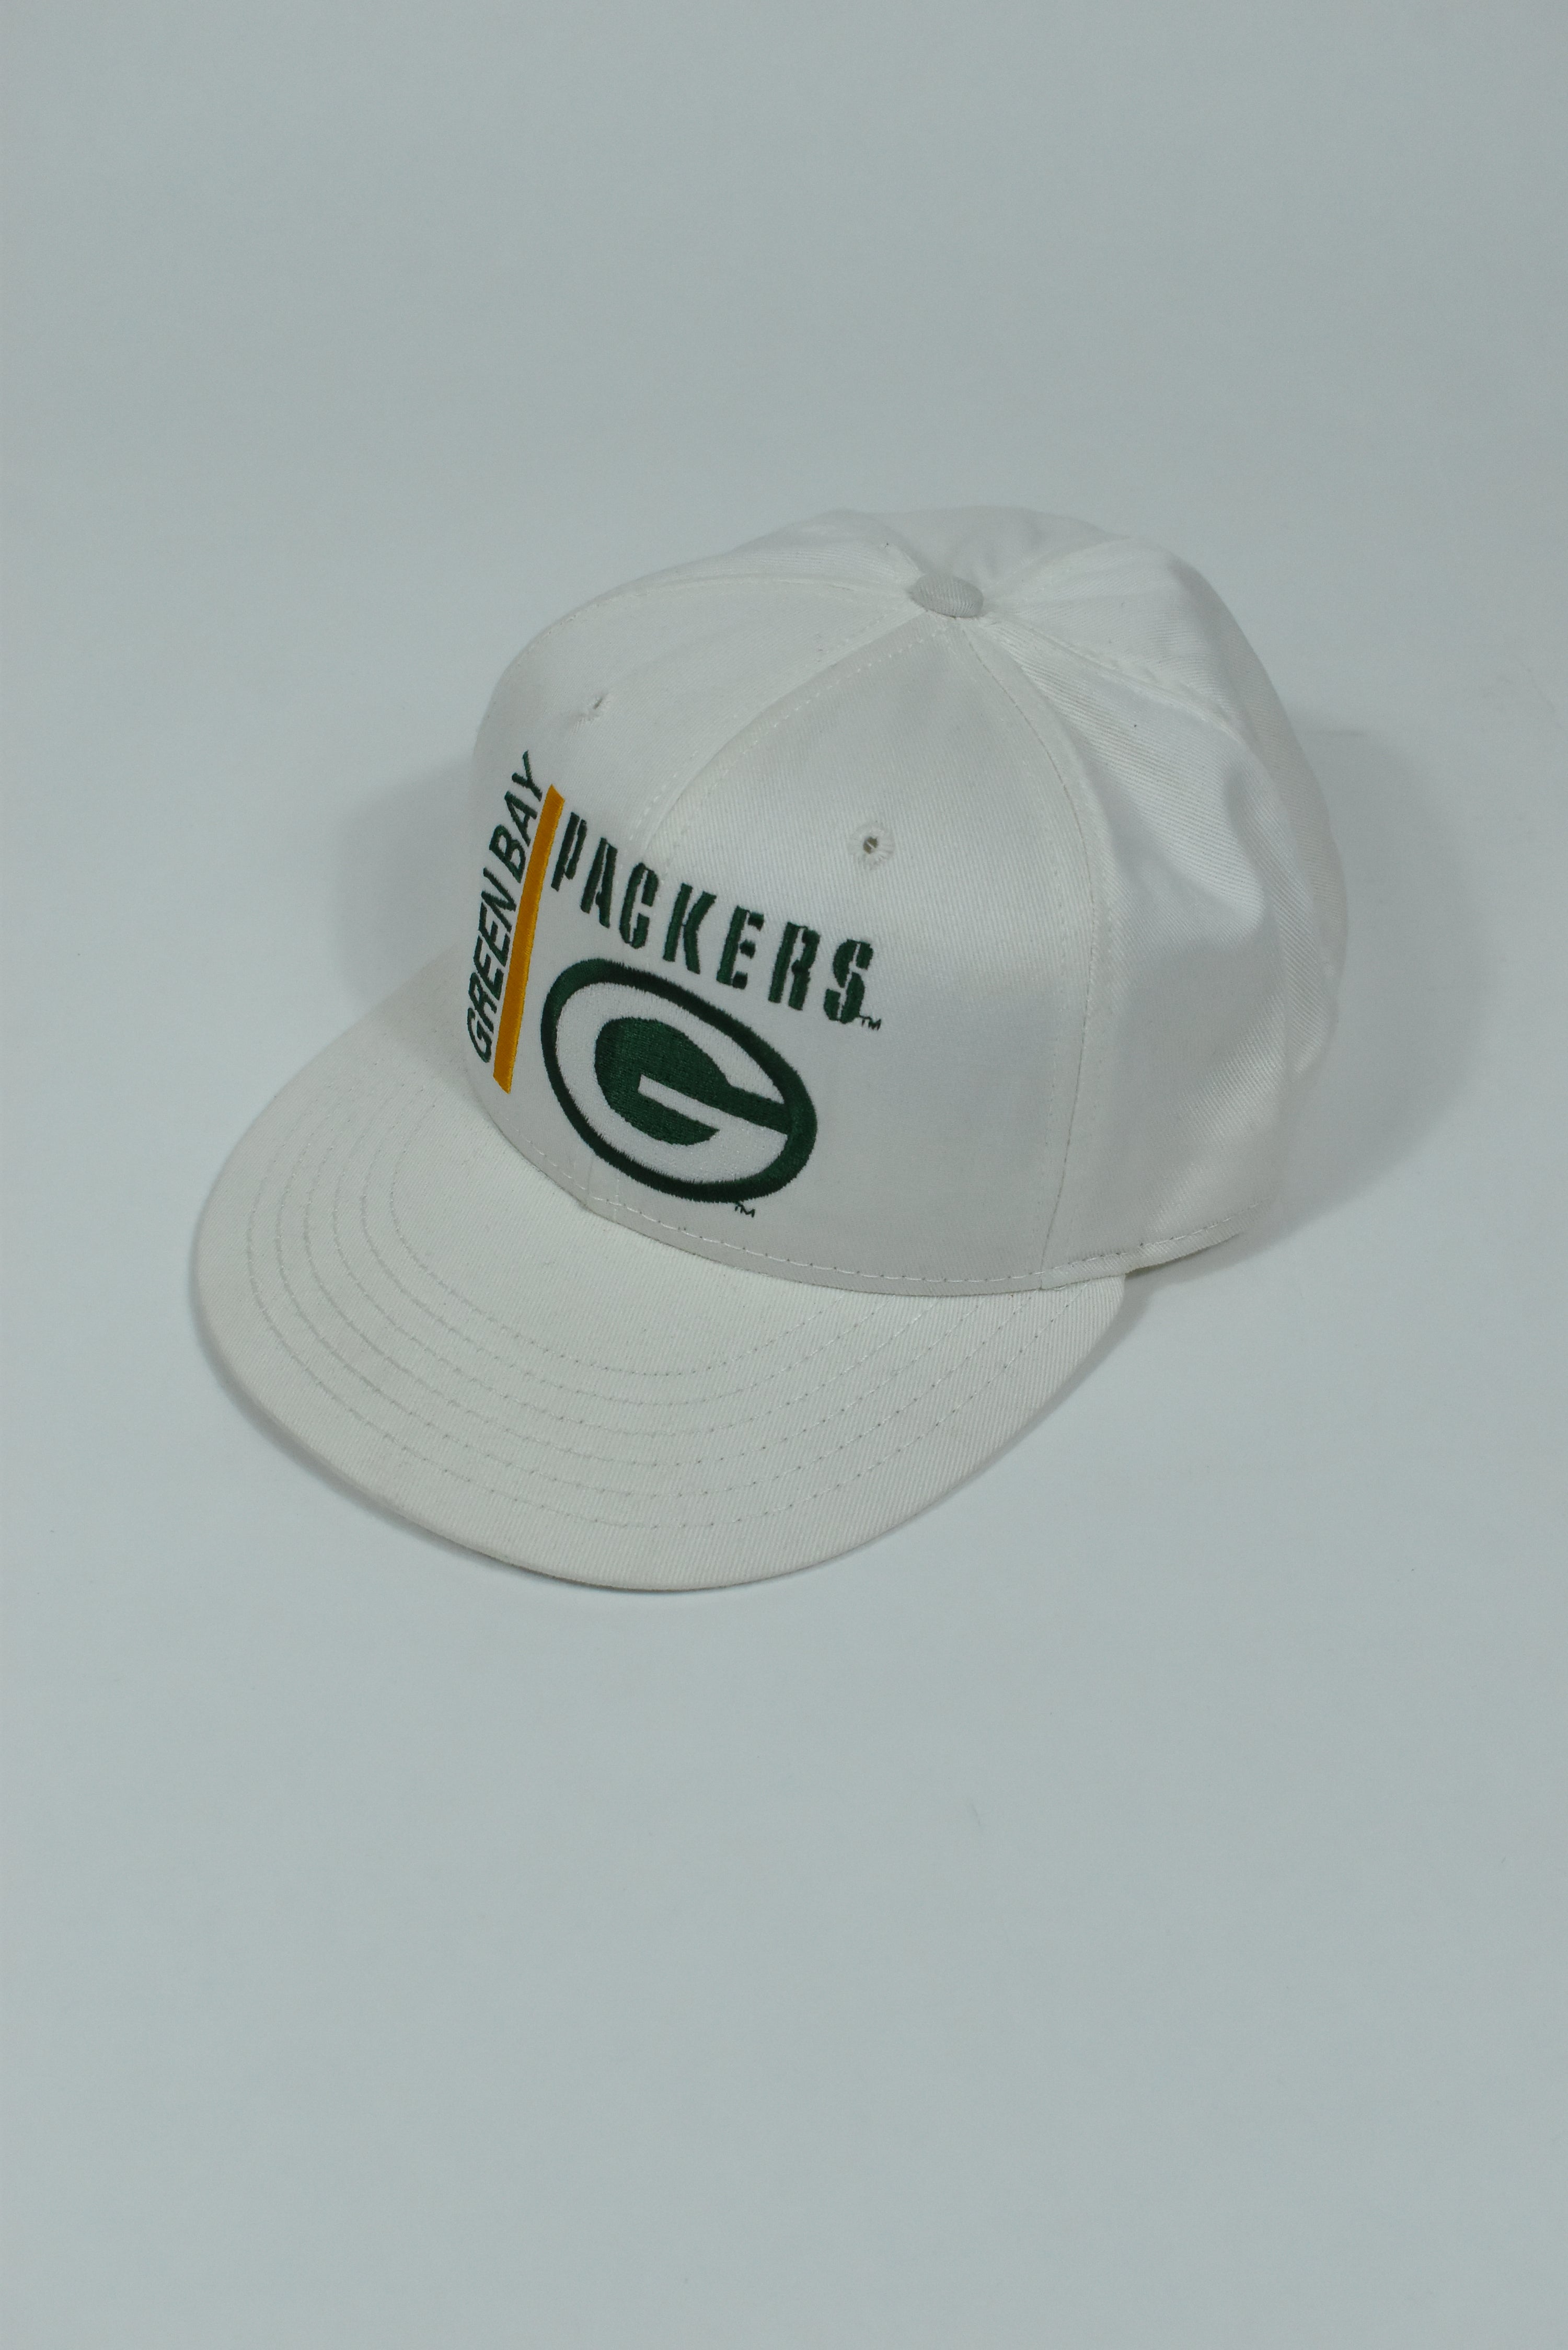 Vintage Green Bay Packers Embroidery Hat OS